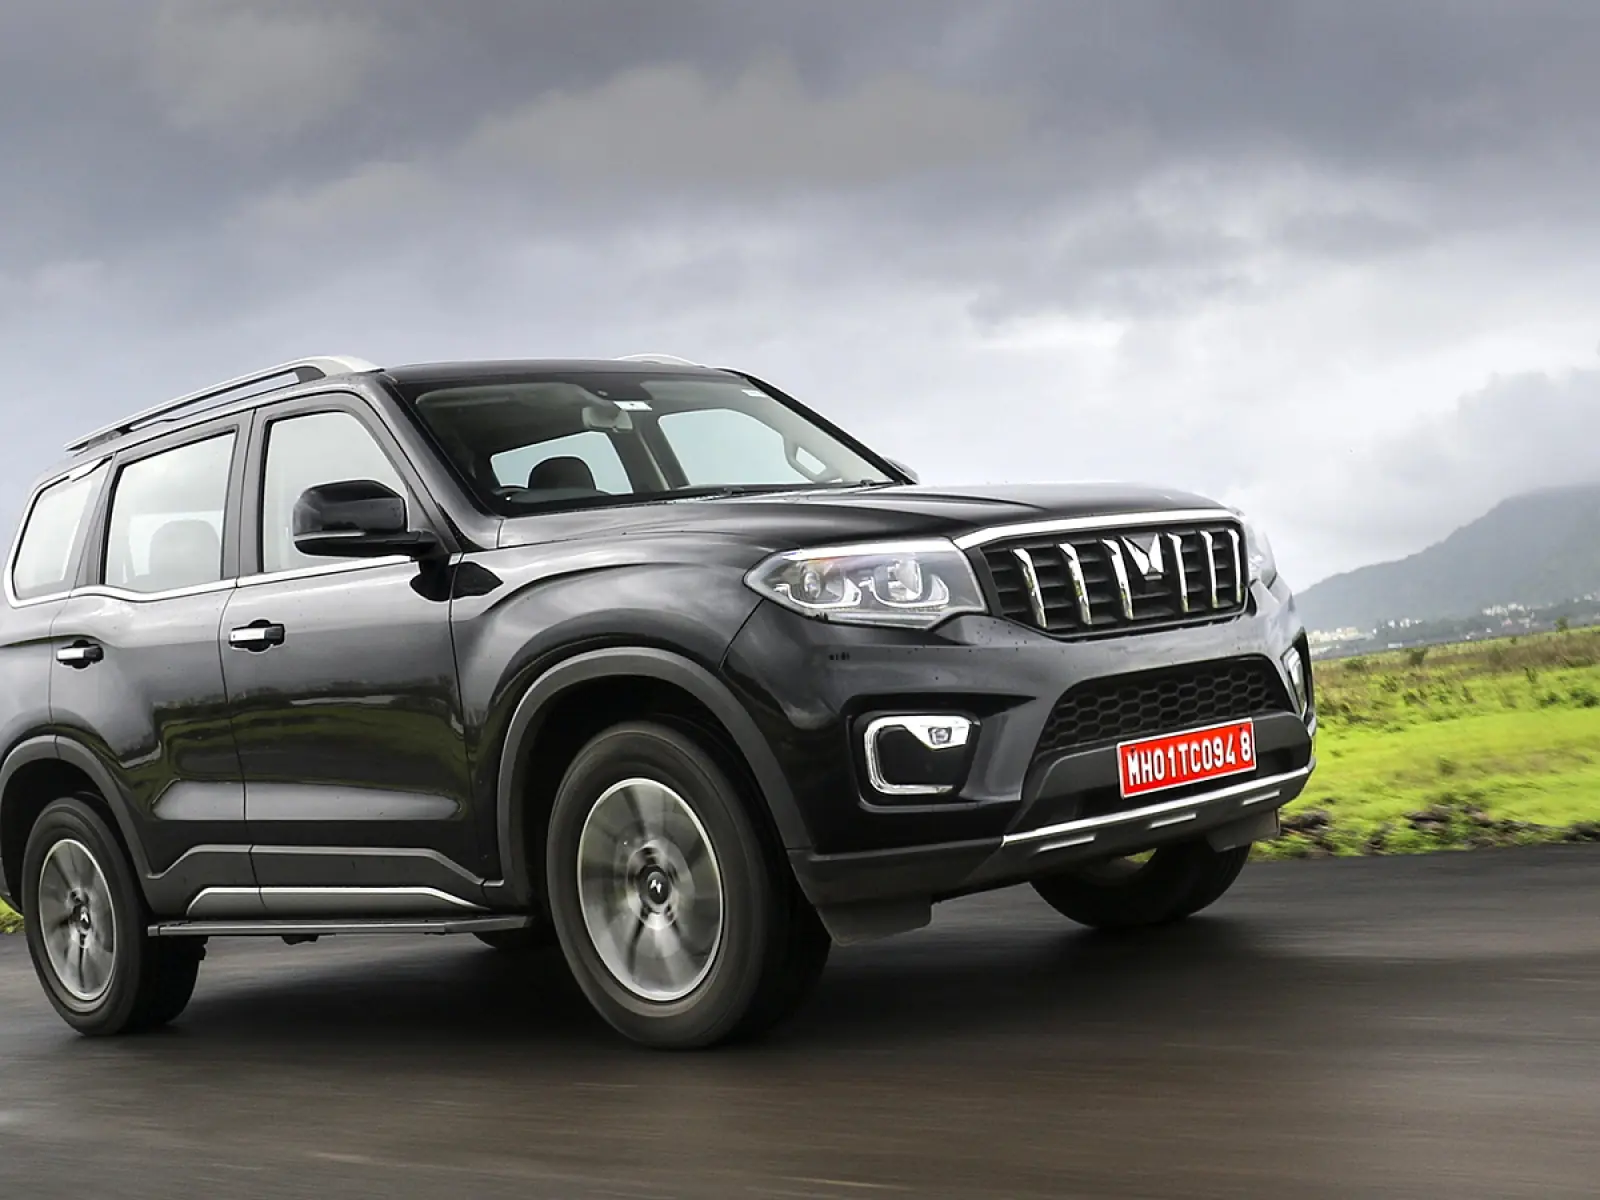 Customers flocked to this variant of Mahindra Scorpio, 12,553 units sold in 31 days